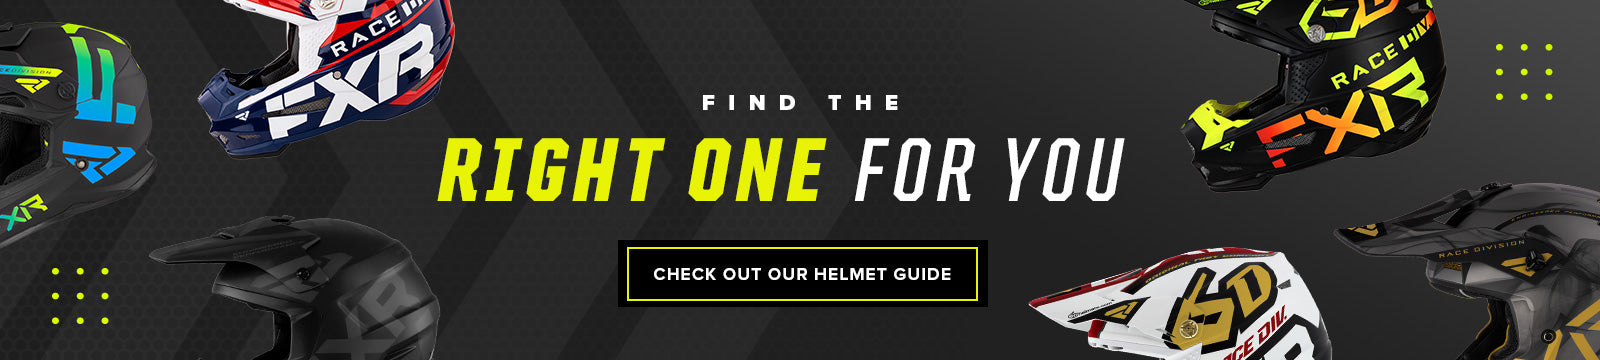 Find the right helmet for you